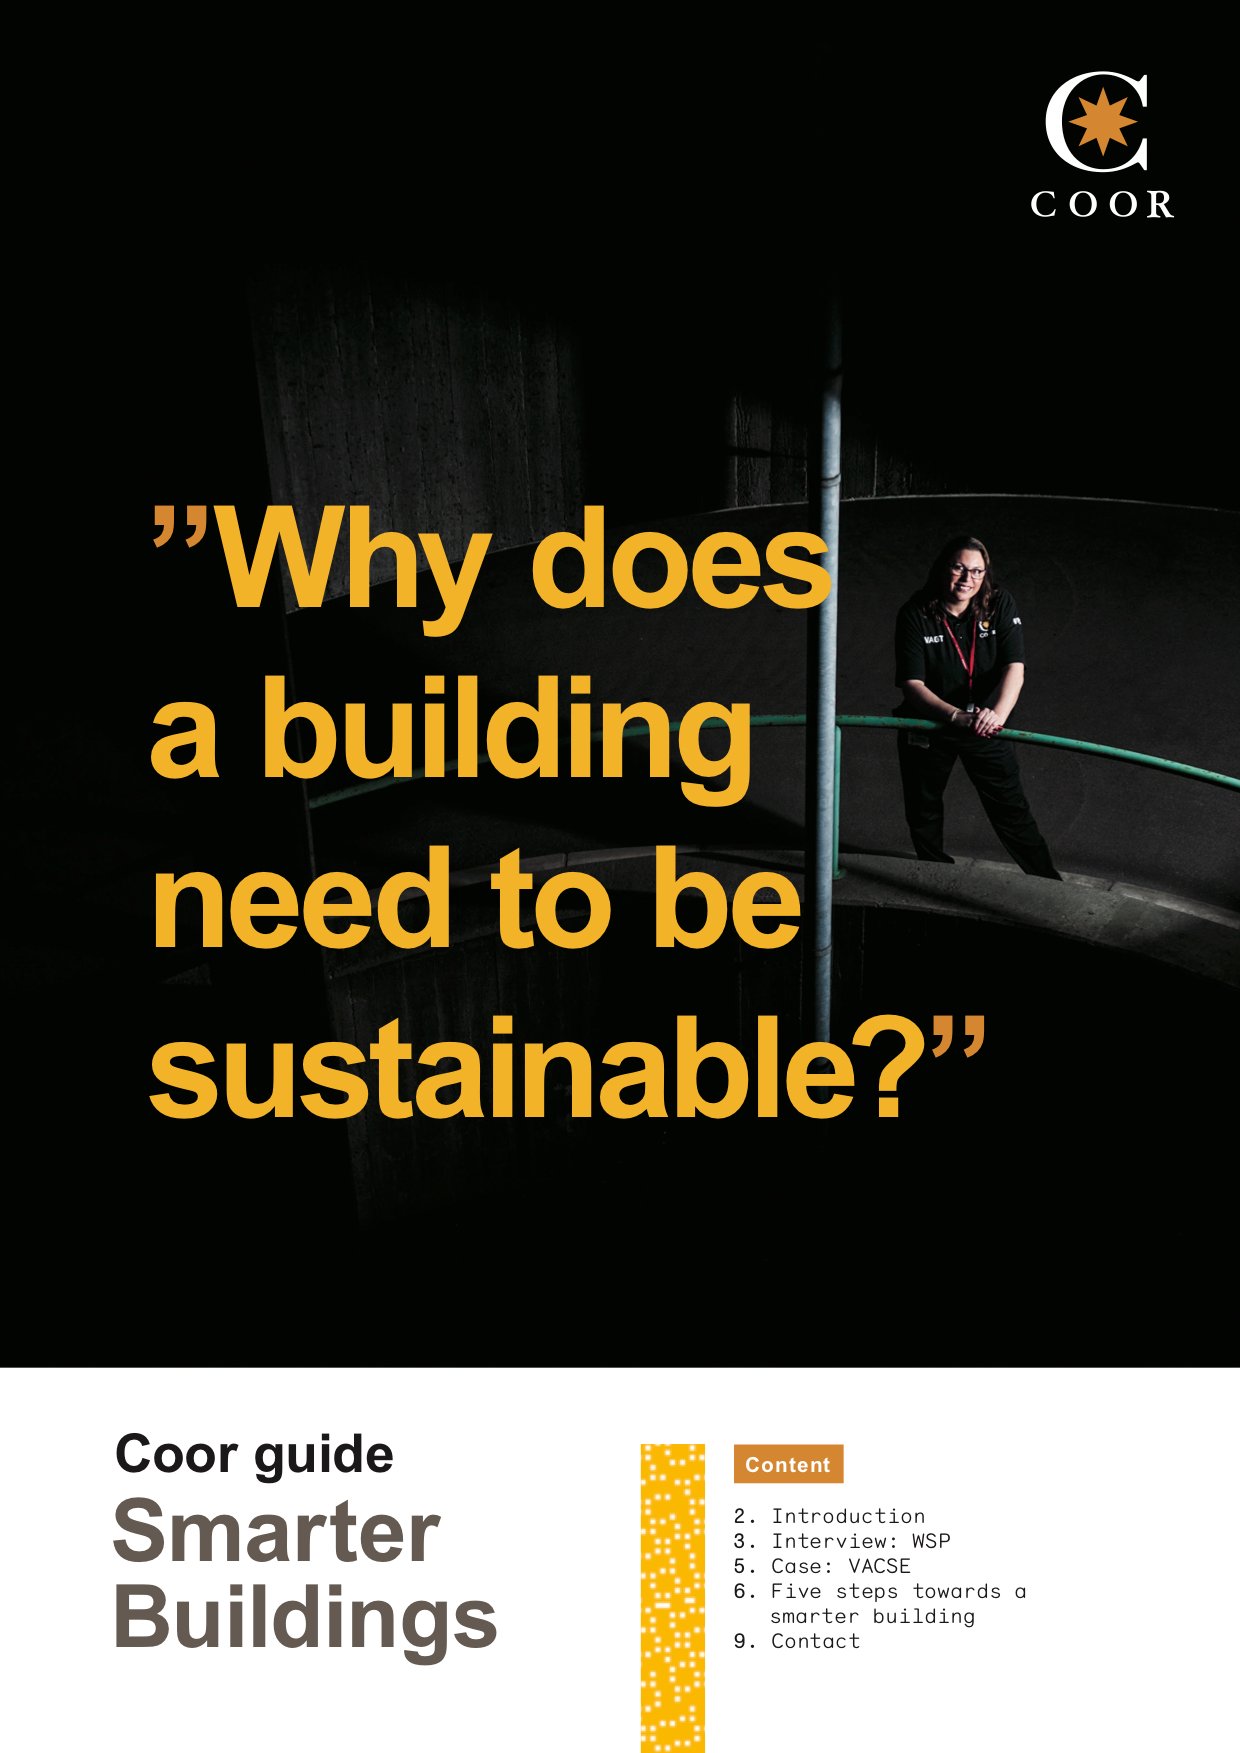 Smart building guide for property management | Coor